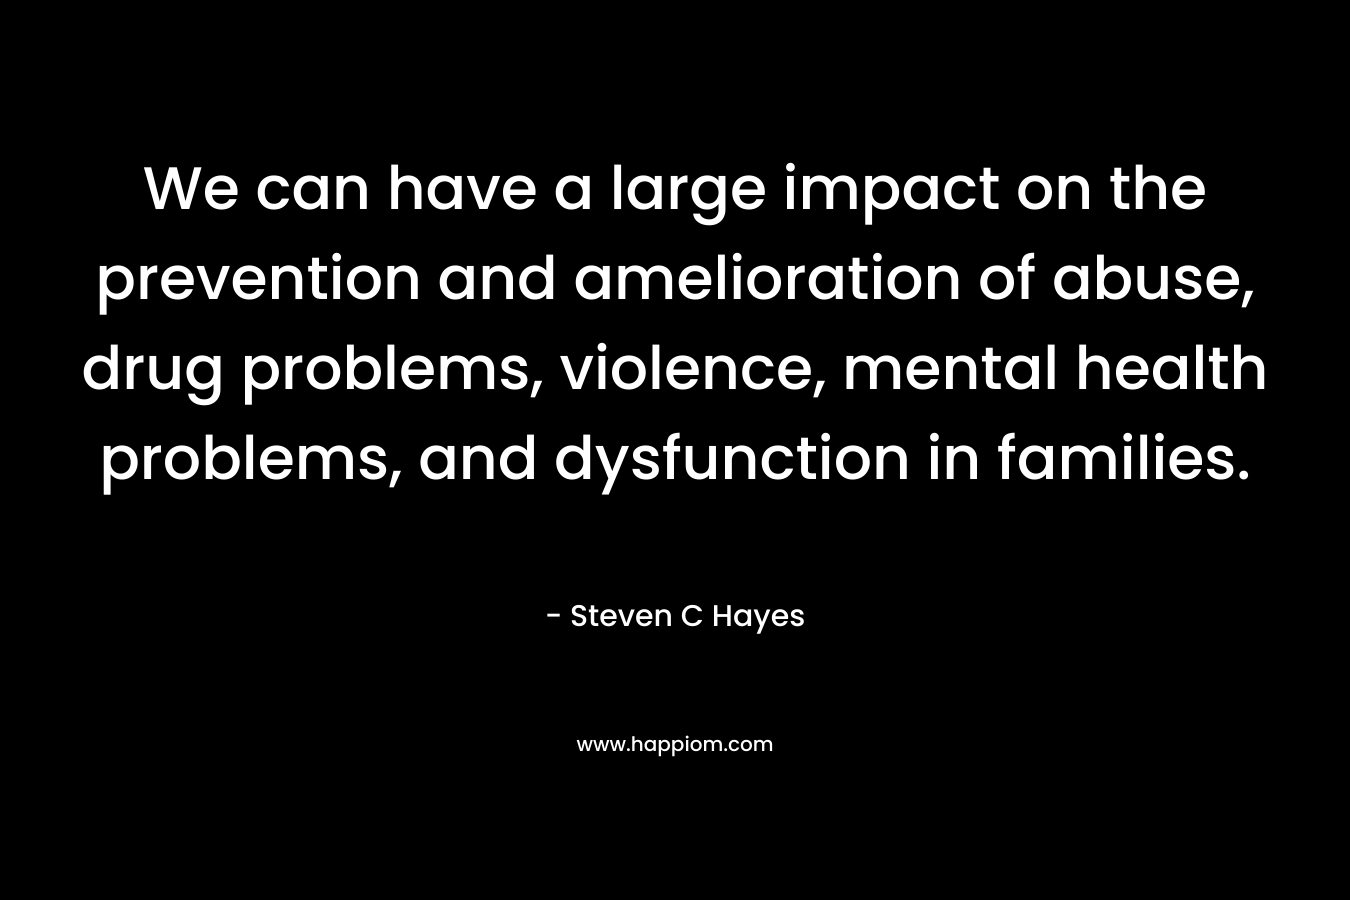 We can have a large impact on the prevention and amelioration of abuse, drug problems, violence, mental health problems, and dysfunction in families.